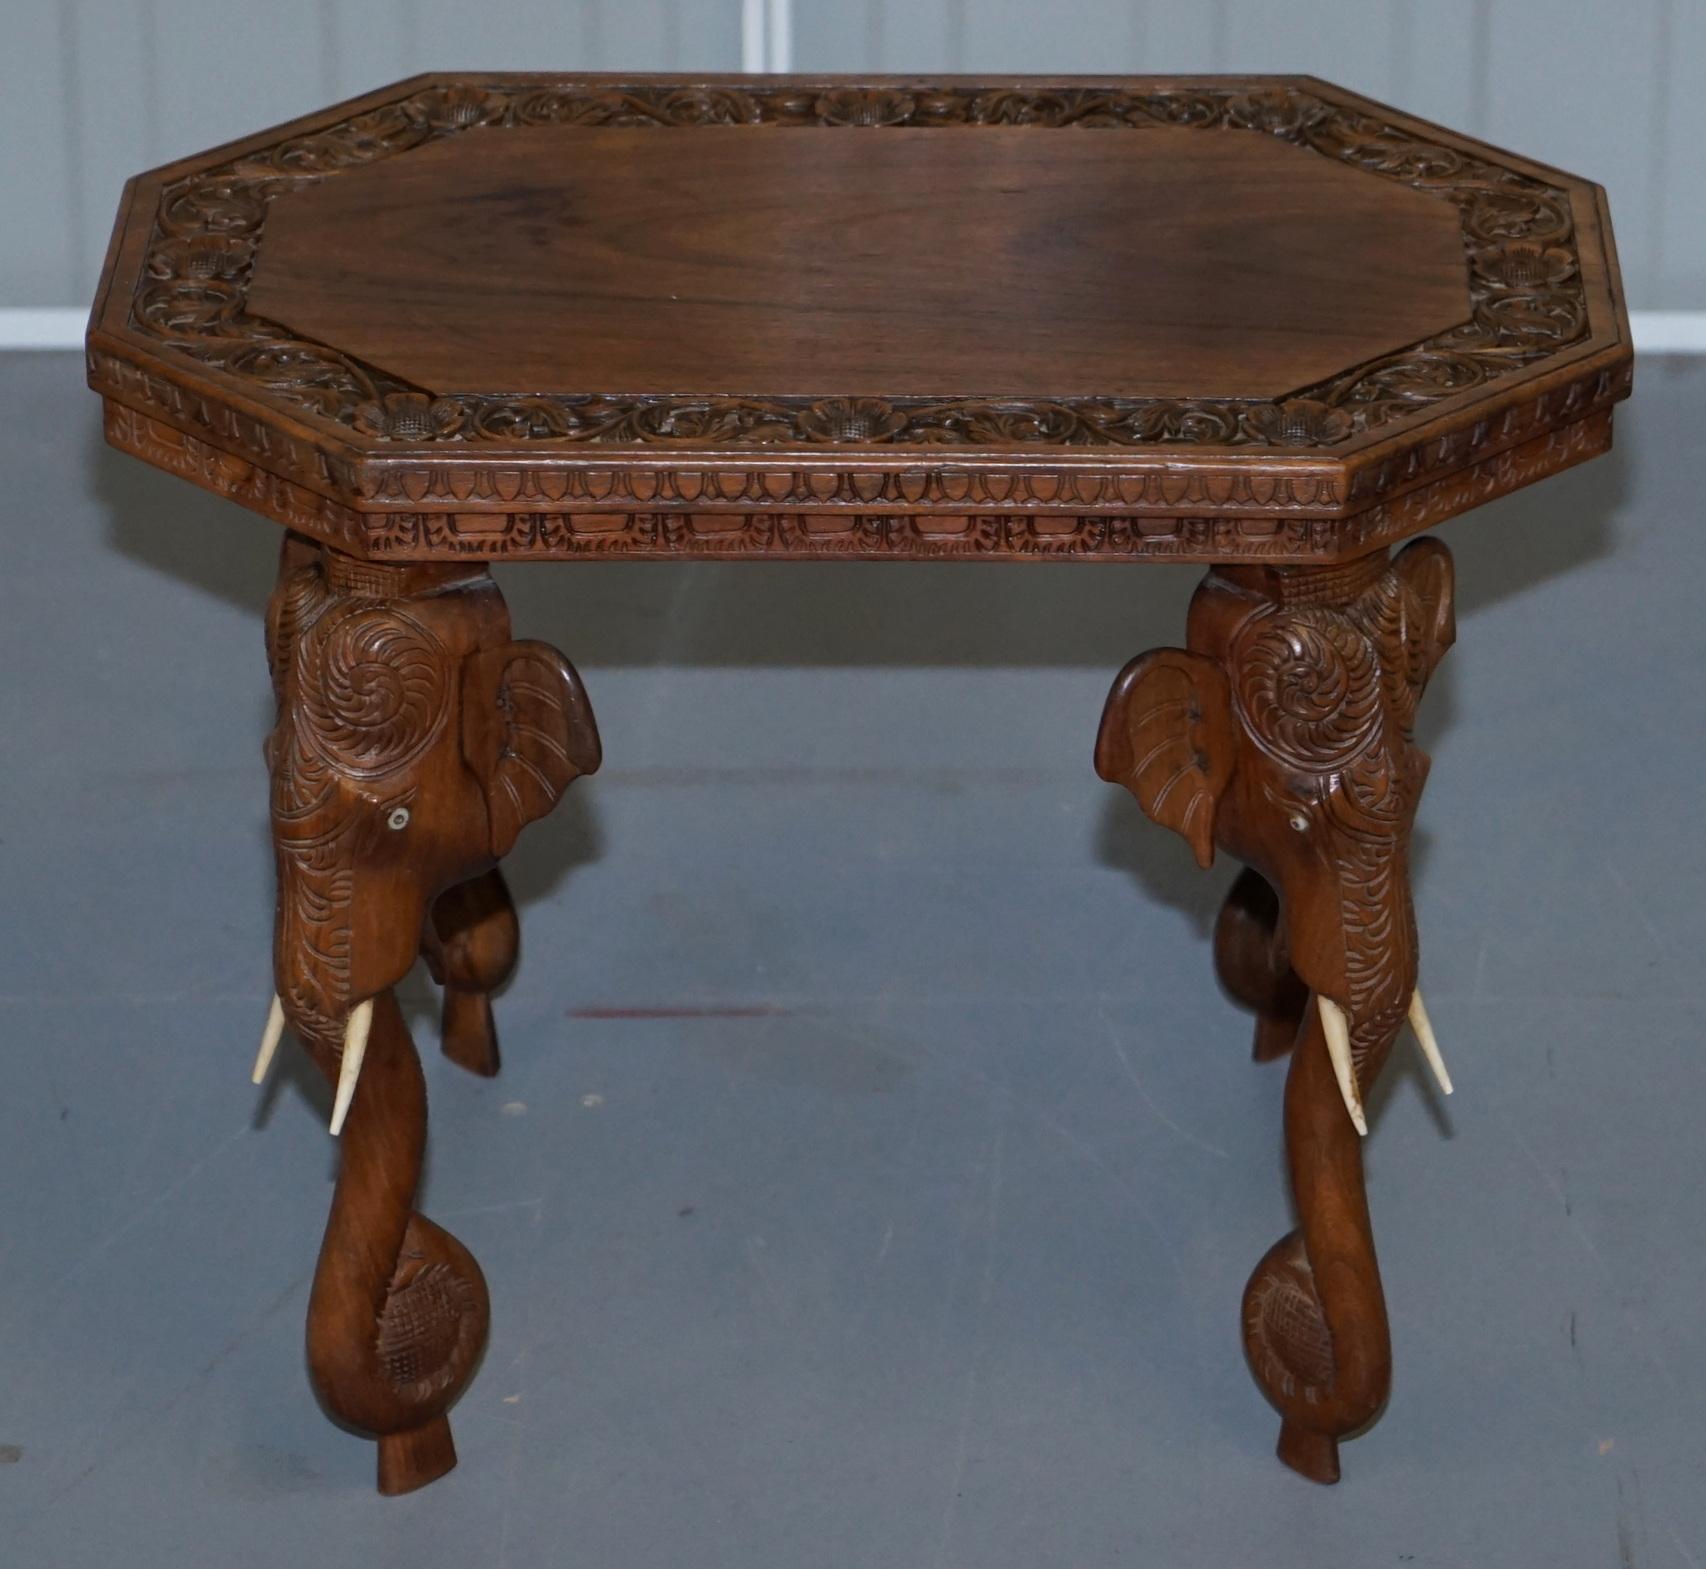 We are delighted to offer for sale this lovely circa 1920 Anglo Indian hand carved hard wood side table

A very decorative and well made piece, from the Anglo Indian export era, you can’t really buy furniture like this new anymore, the